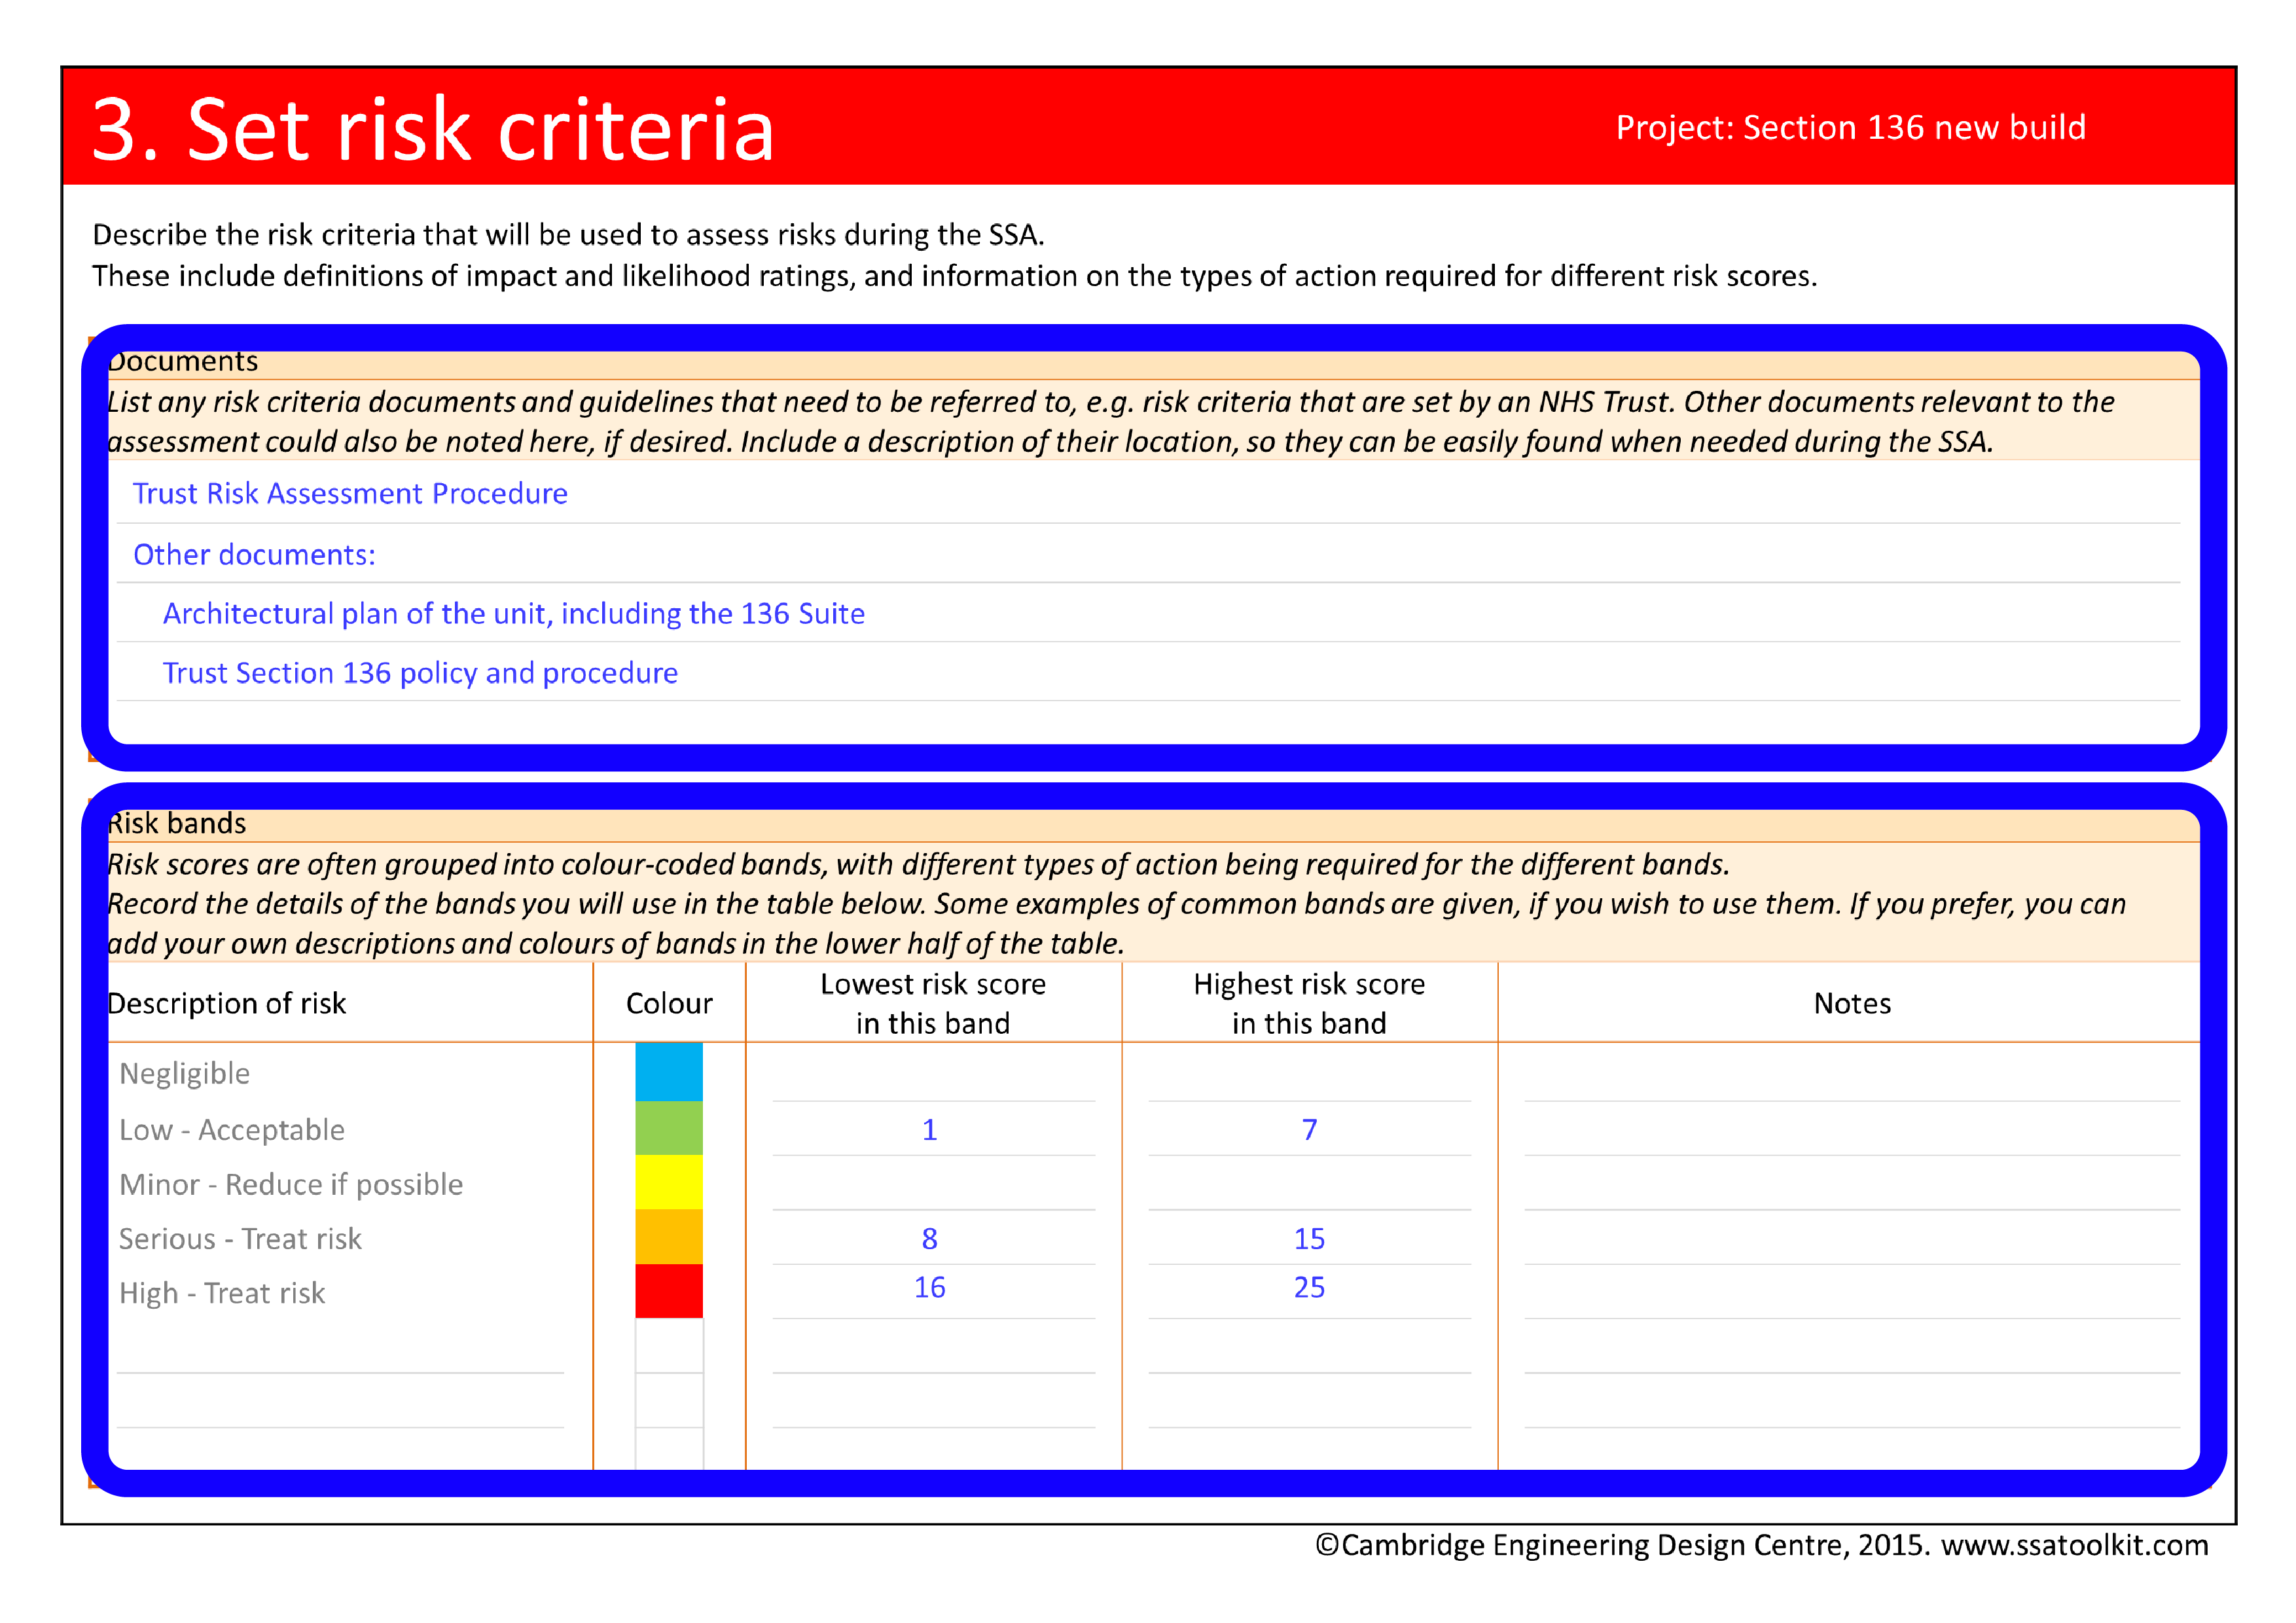 Screenshot of the Set risk criteria page from the Section 136 case study. The full form in pdf is available from the Resources page.